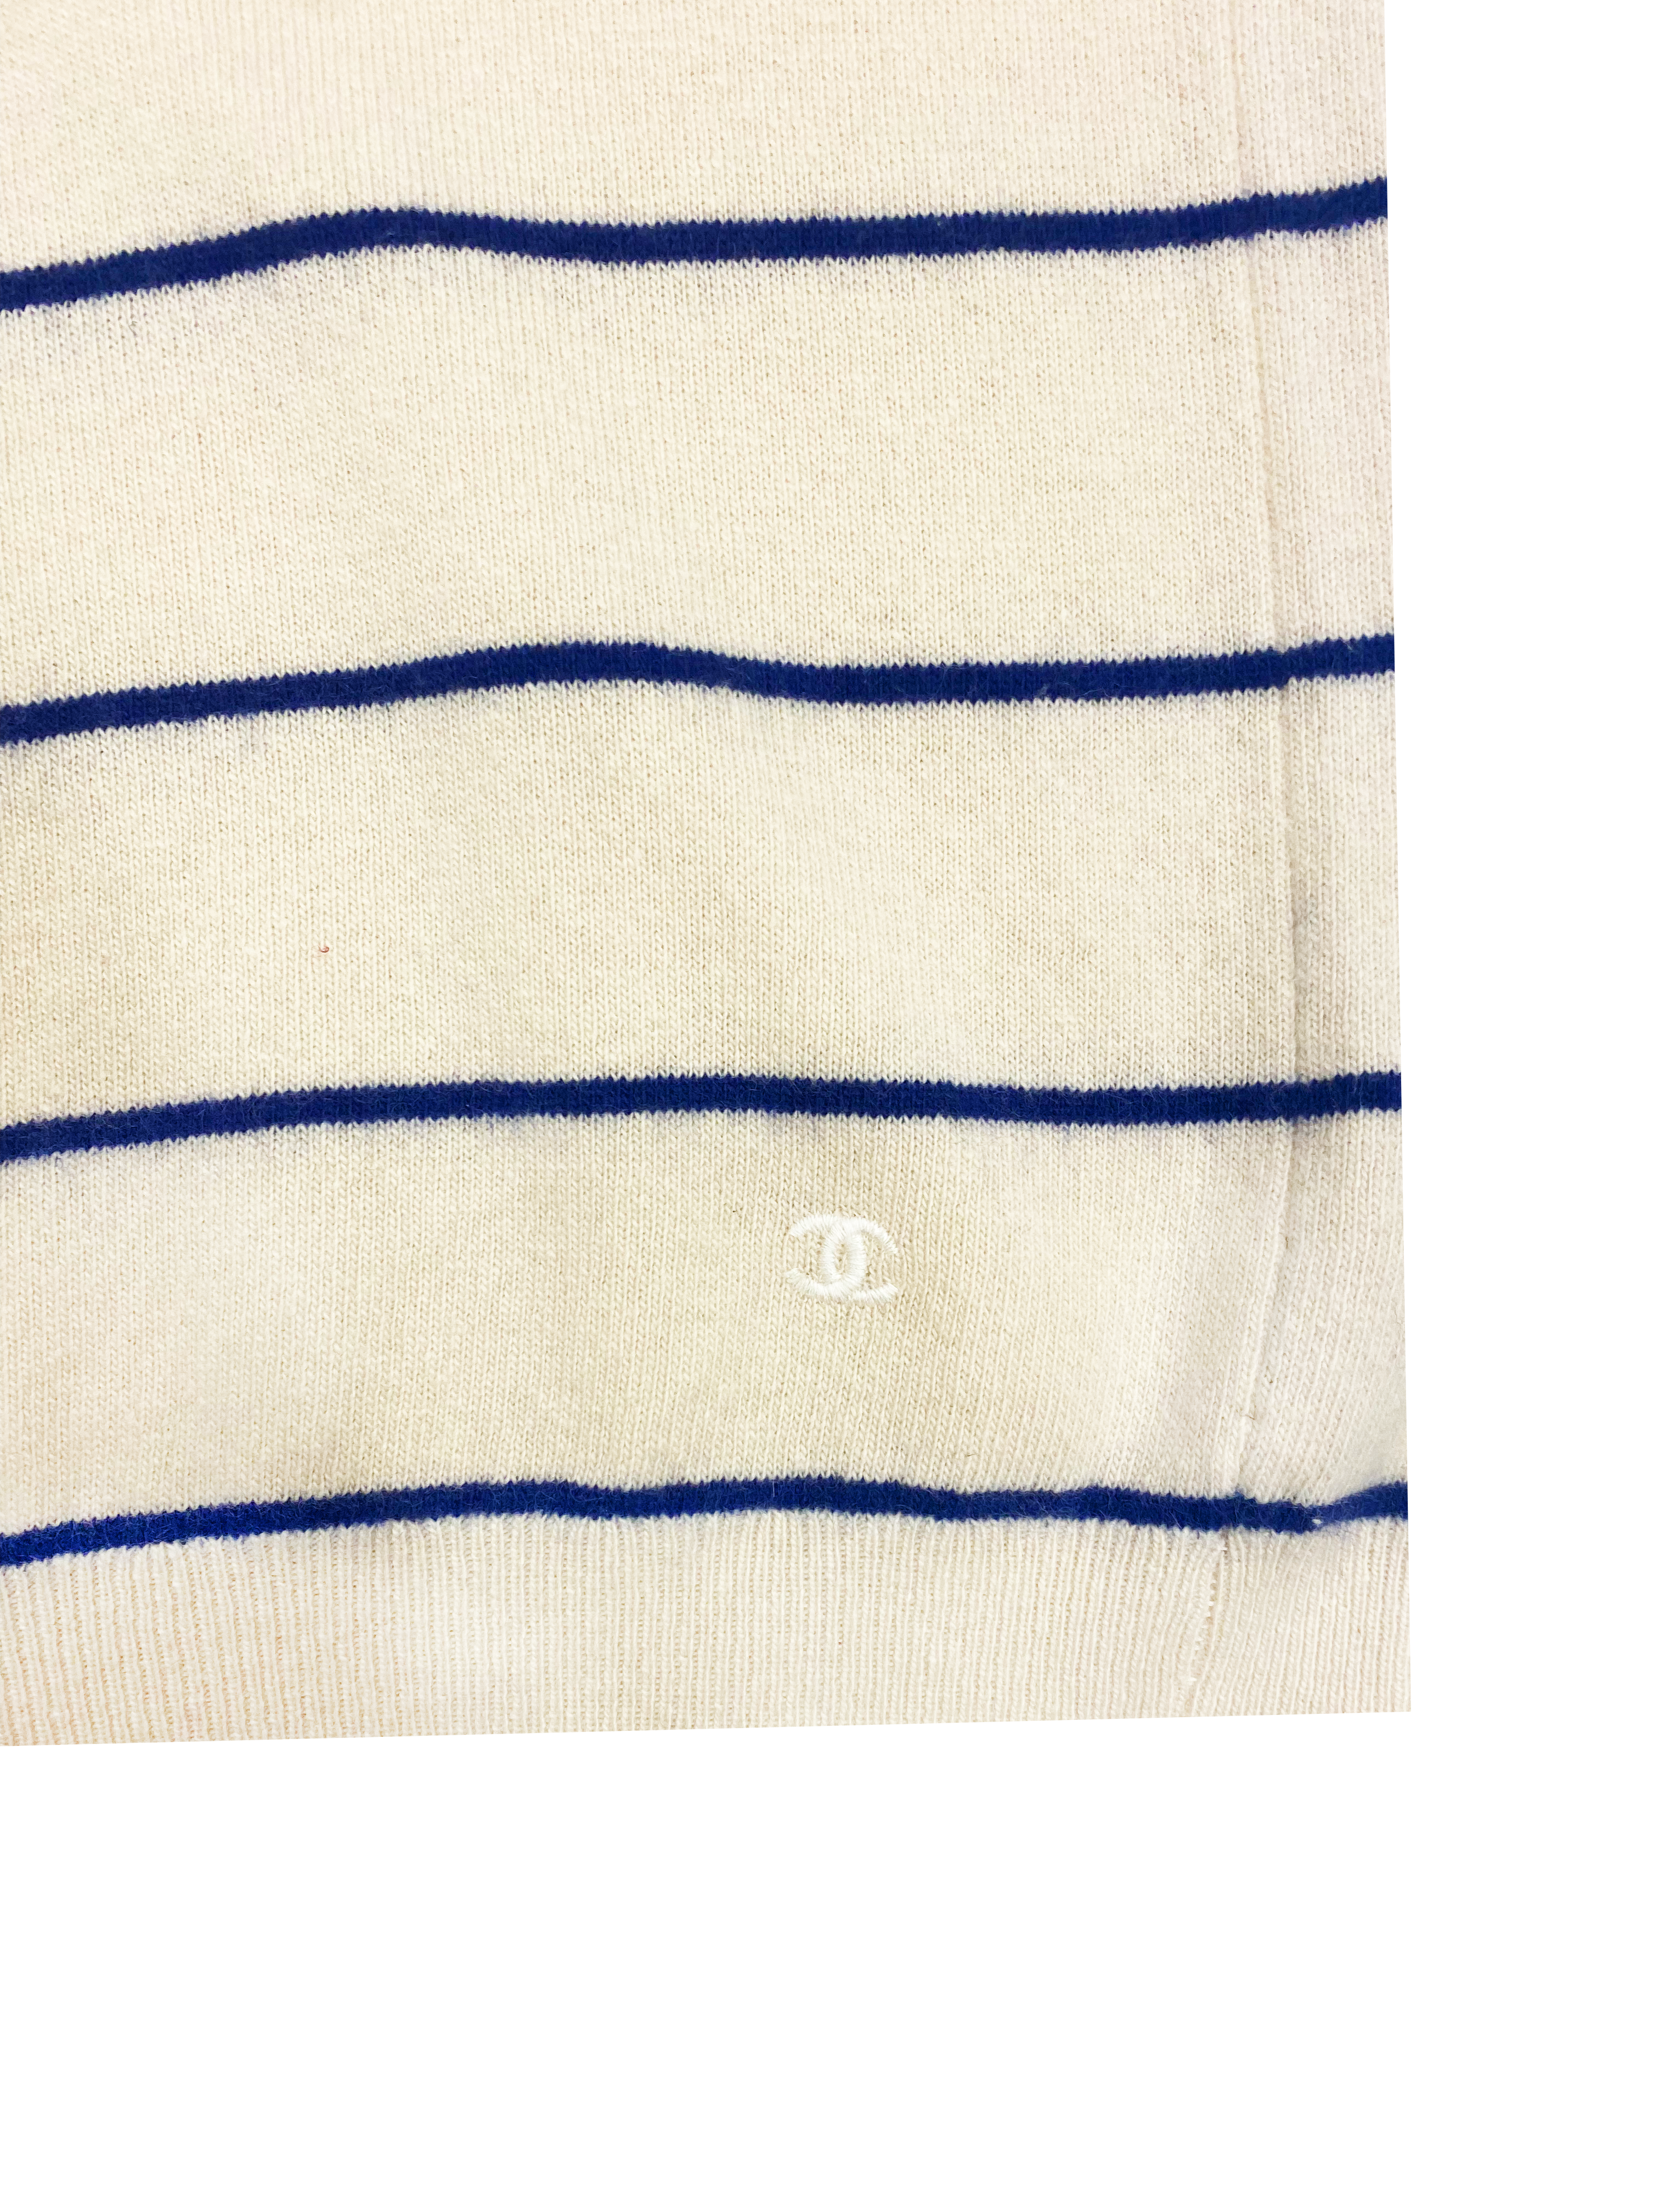 Chanel 1980s Cashmere Cream and Navy Striped Sweater